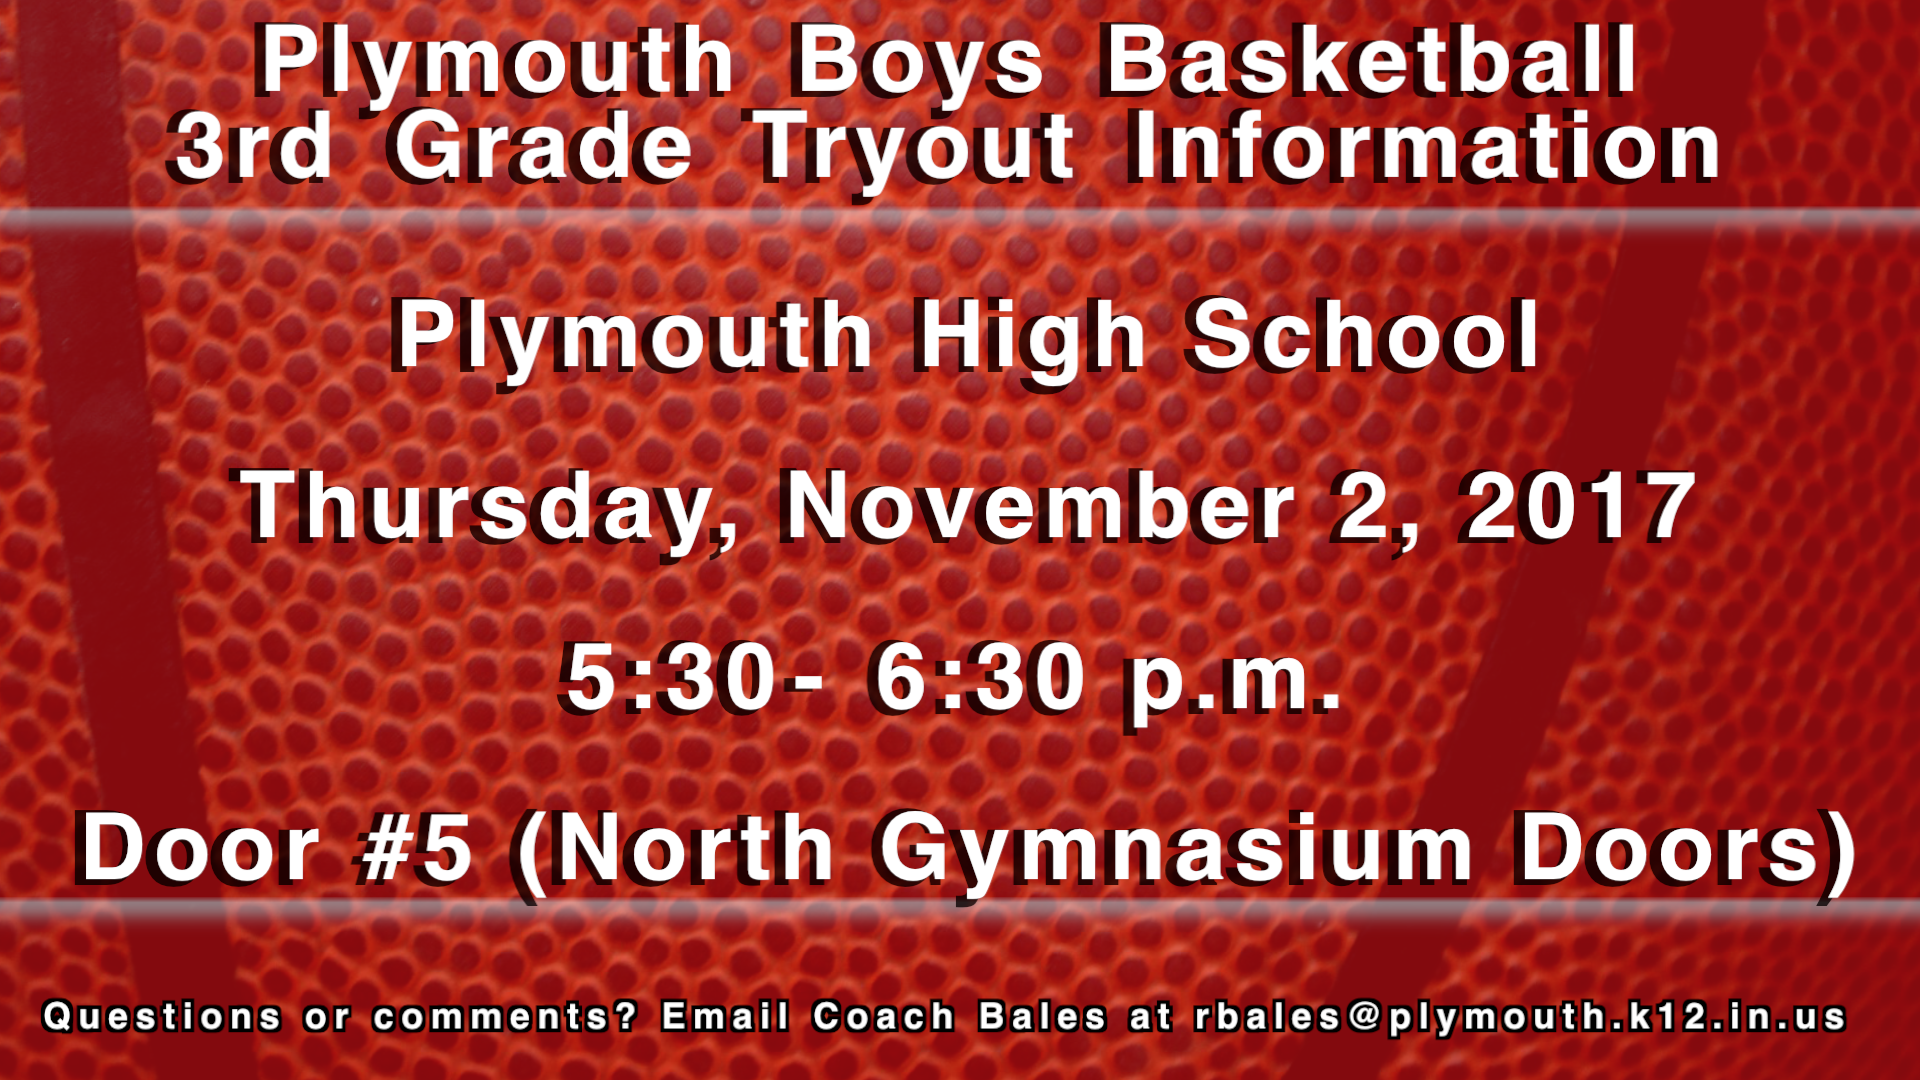 Plymouth Boys Basketball 3rd Grade Tryout Information